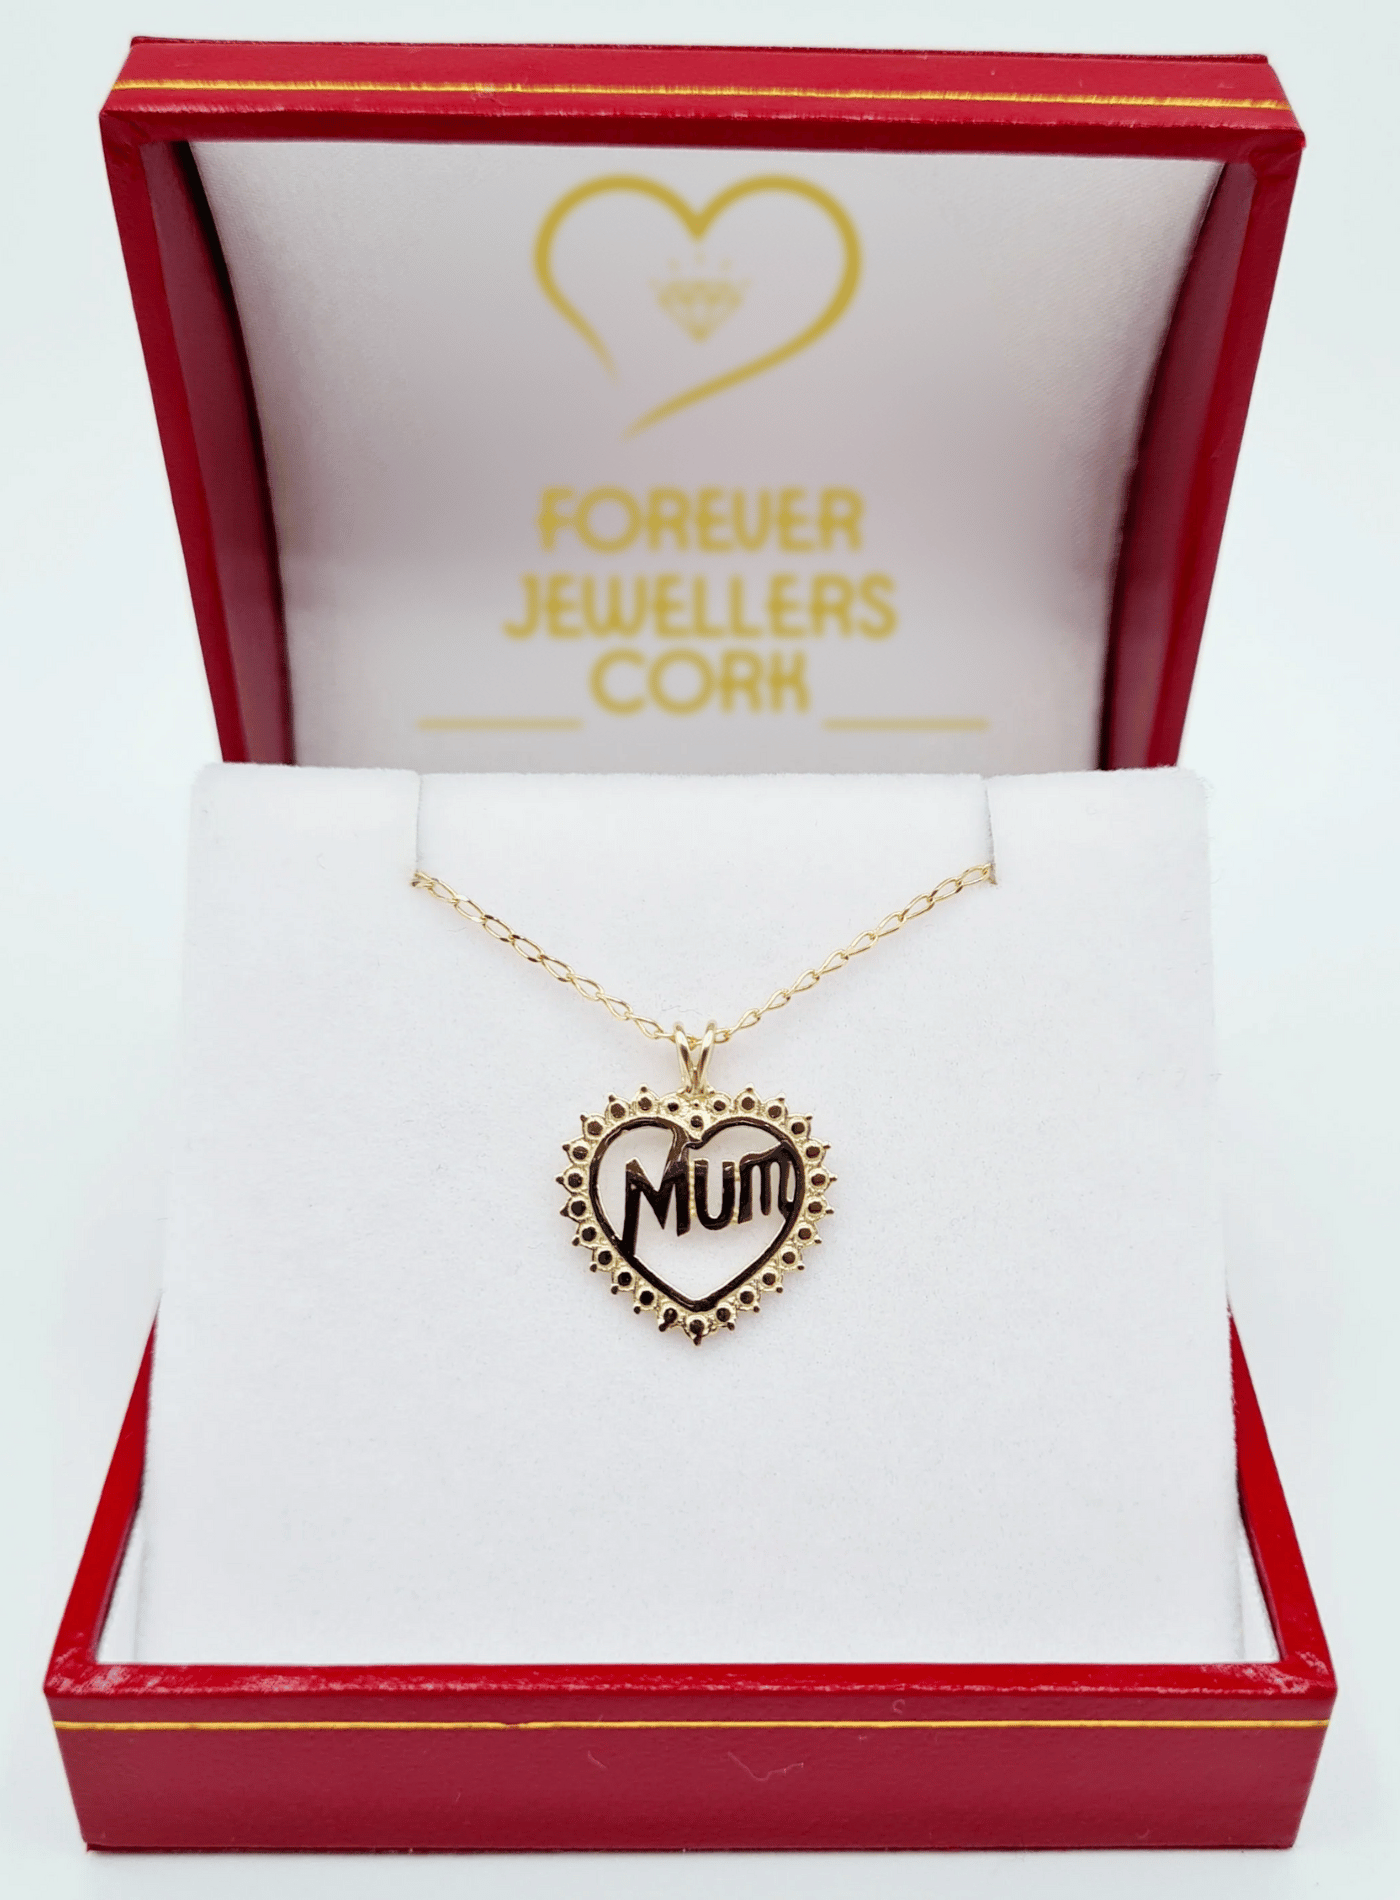 9ct Gold Oval Mum Locket with White Gold Design on Chain 16 - 18 Inches |  Jewellerybox.co.uk